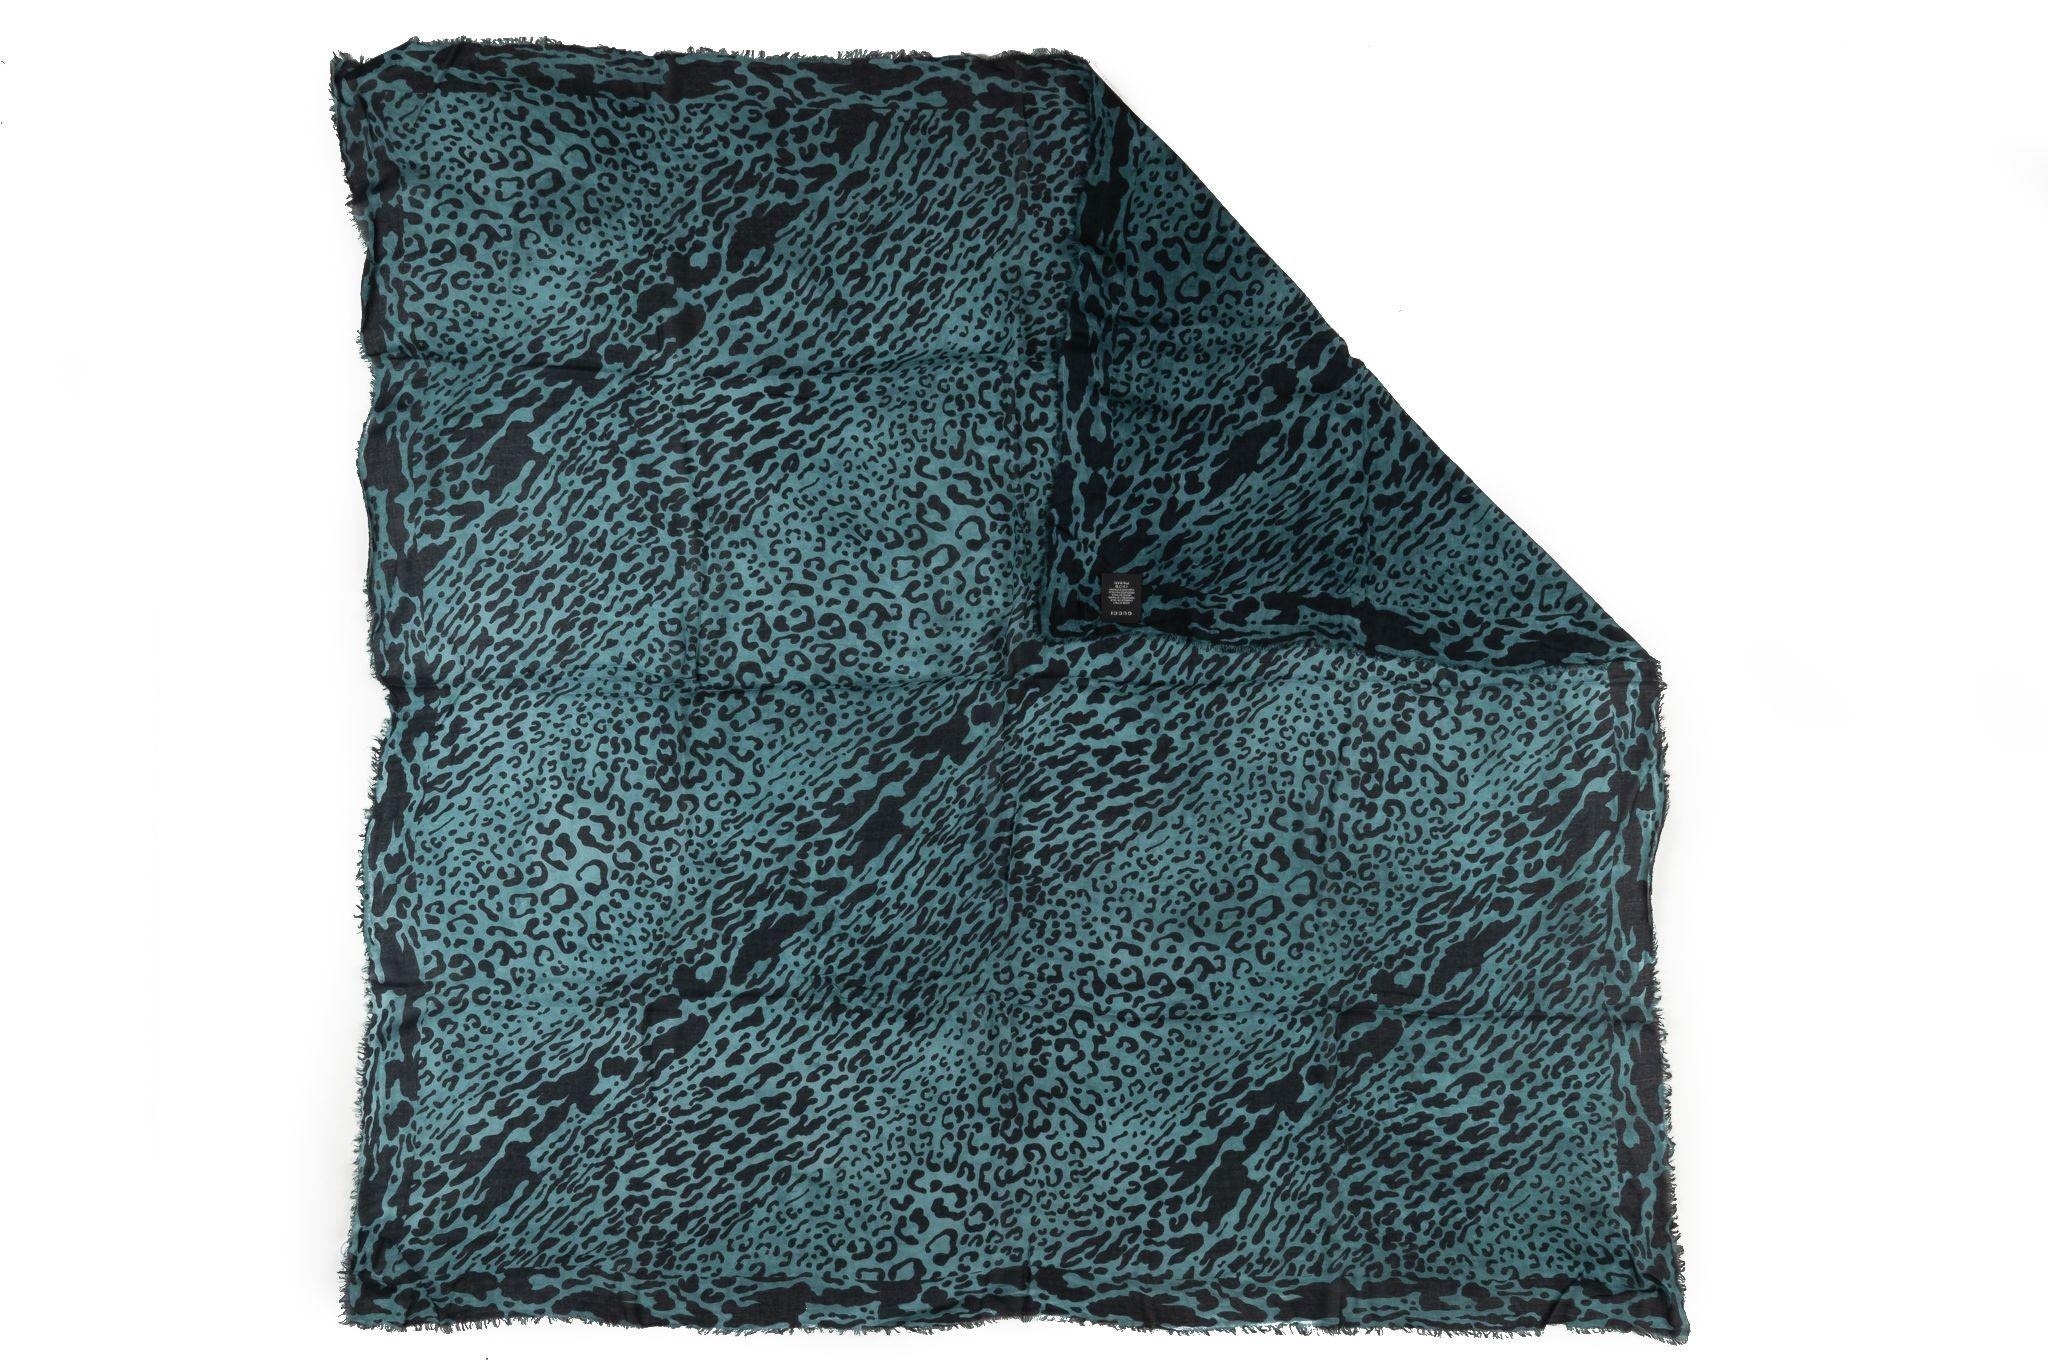 Gucci teal black cheetah print large shawl. Modal and wool combination makes up the material. Comes new with the tag!